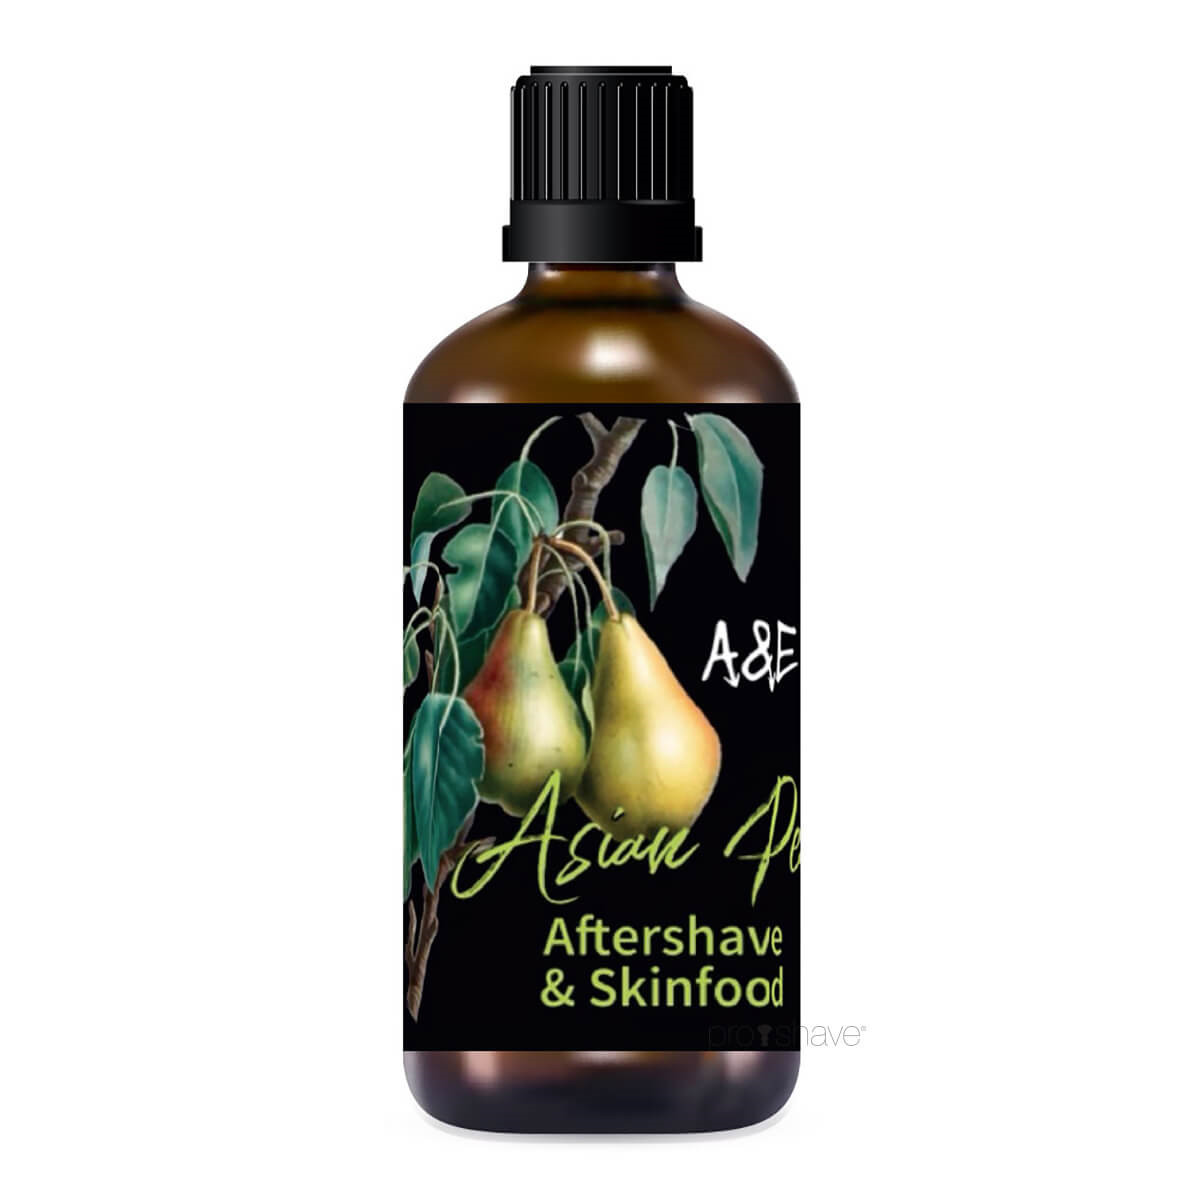 Ariana & Evans Aftershave, Asian Pear, 100 ml.